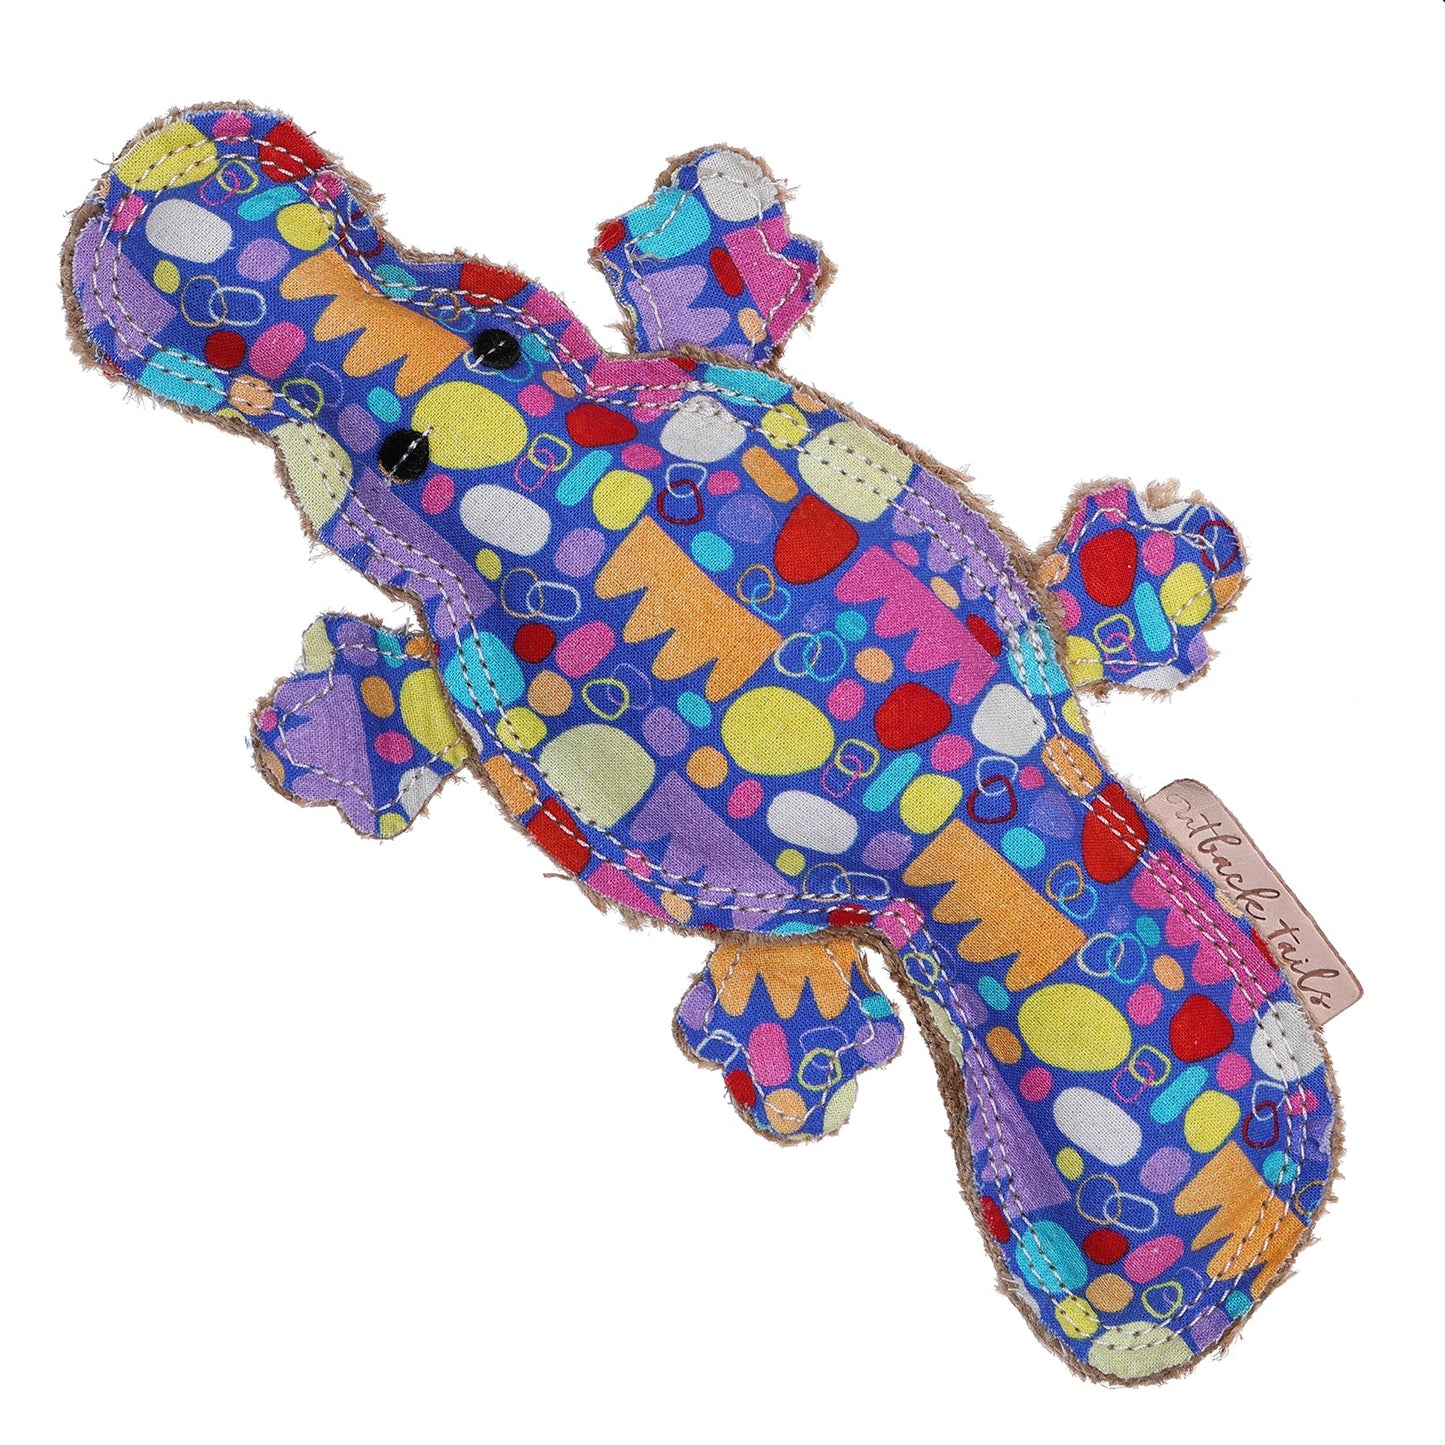 Percy the platypus dog toy by outback tails on a white background. The toys shows the indigenous artwork print and natural fibres and double stitching